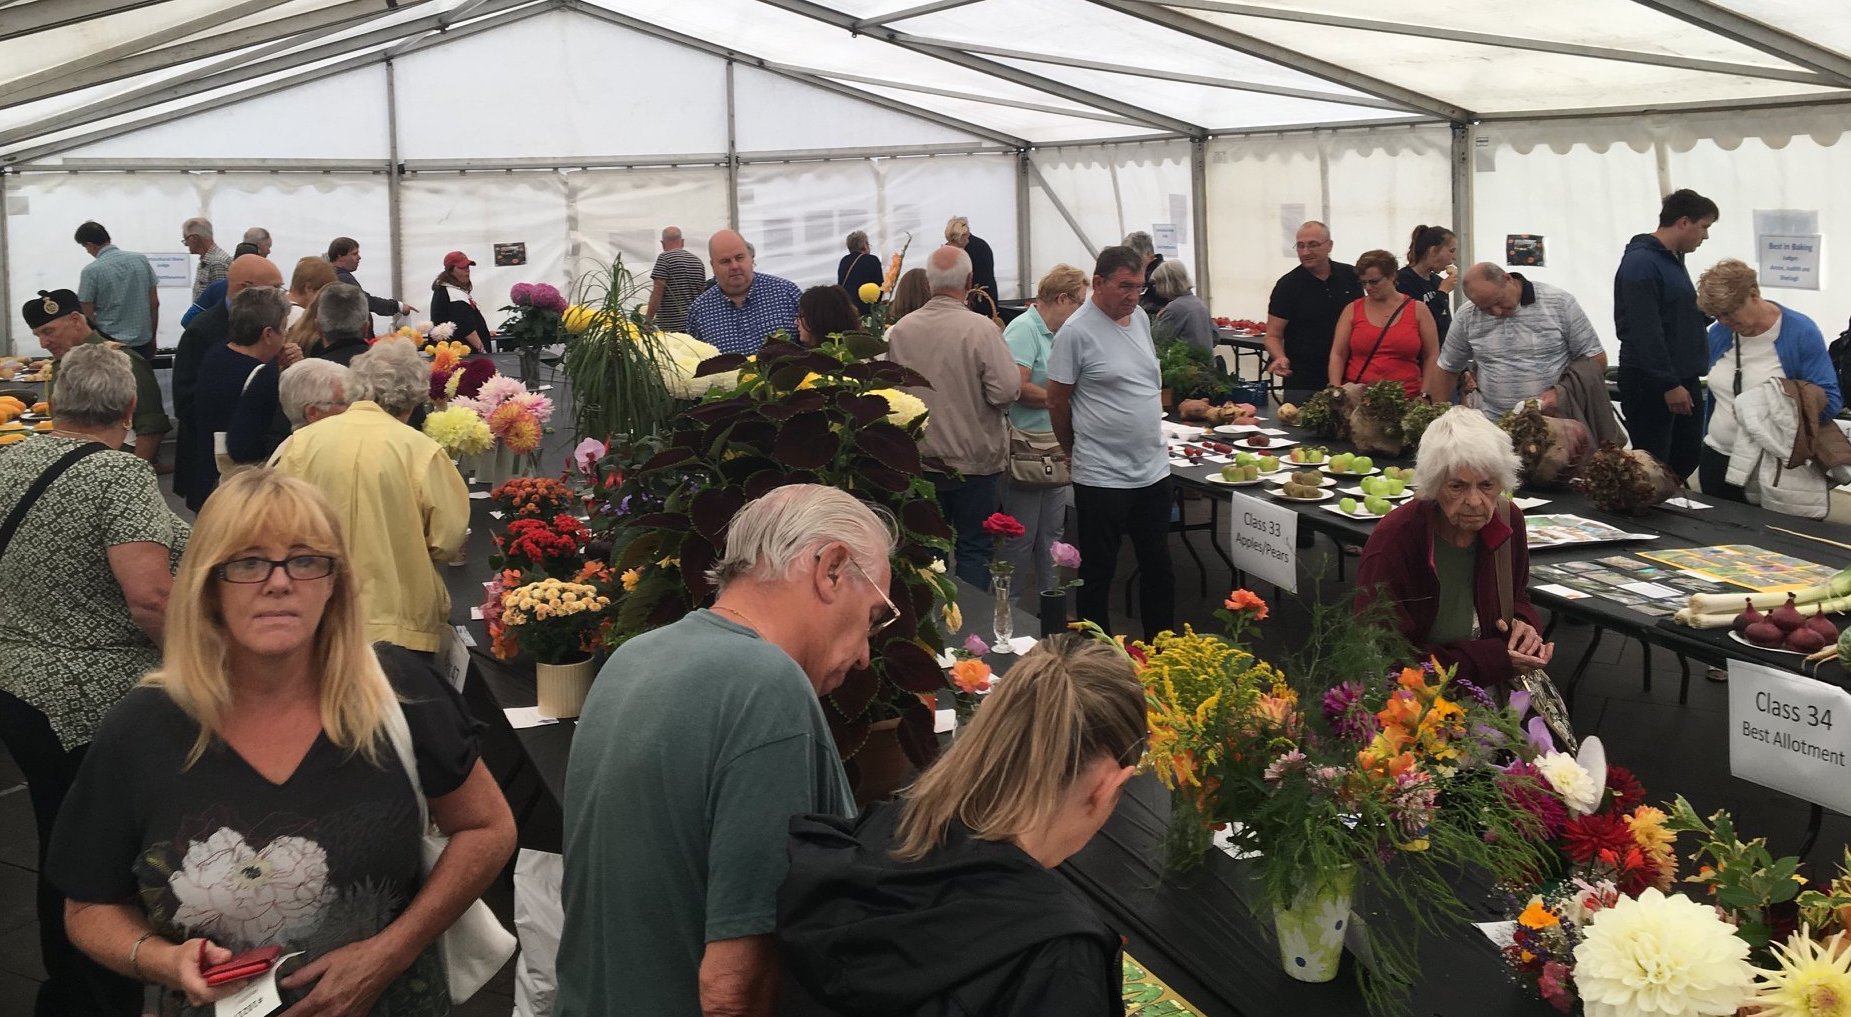 Garden and craft show organisers hoping every little helps to grow